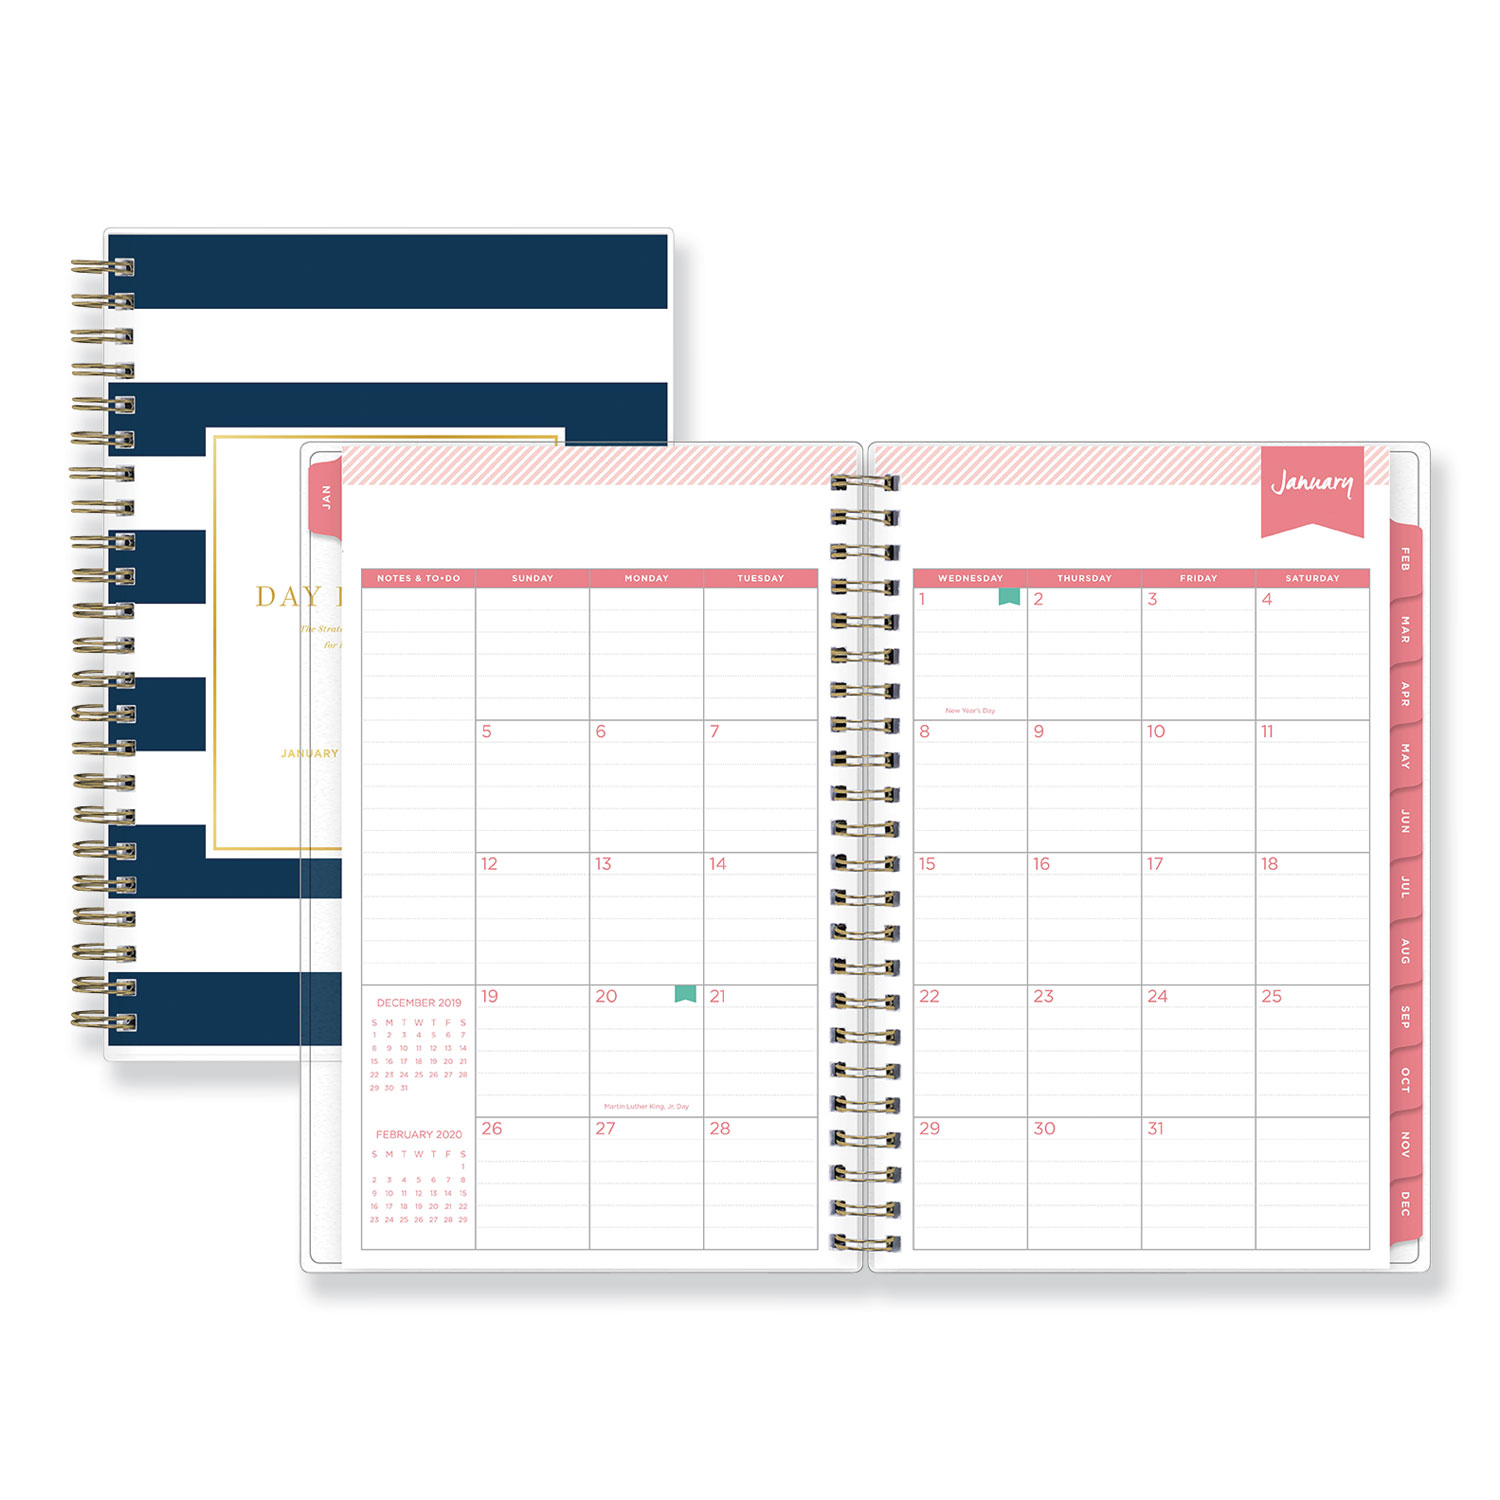  Blue Sky BLS103623 Day Designer Daily/Monthly Planner, 8 x 5, Navy/White, 2020 (BLS103623) 